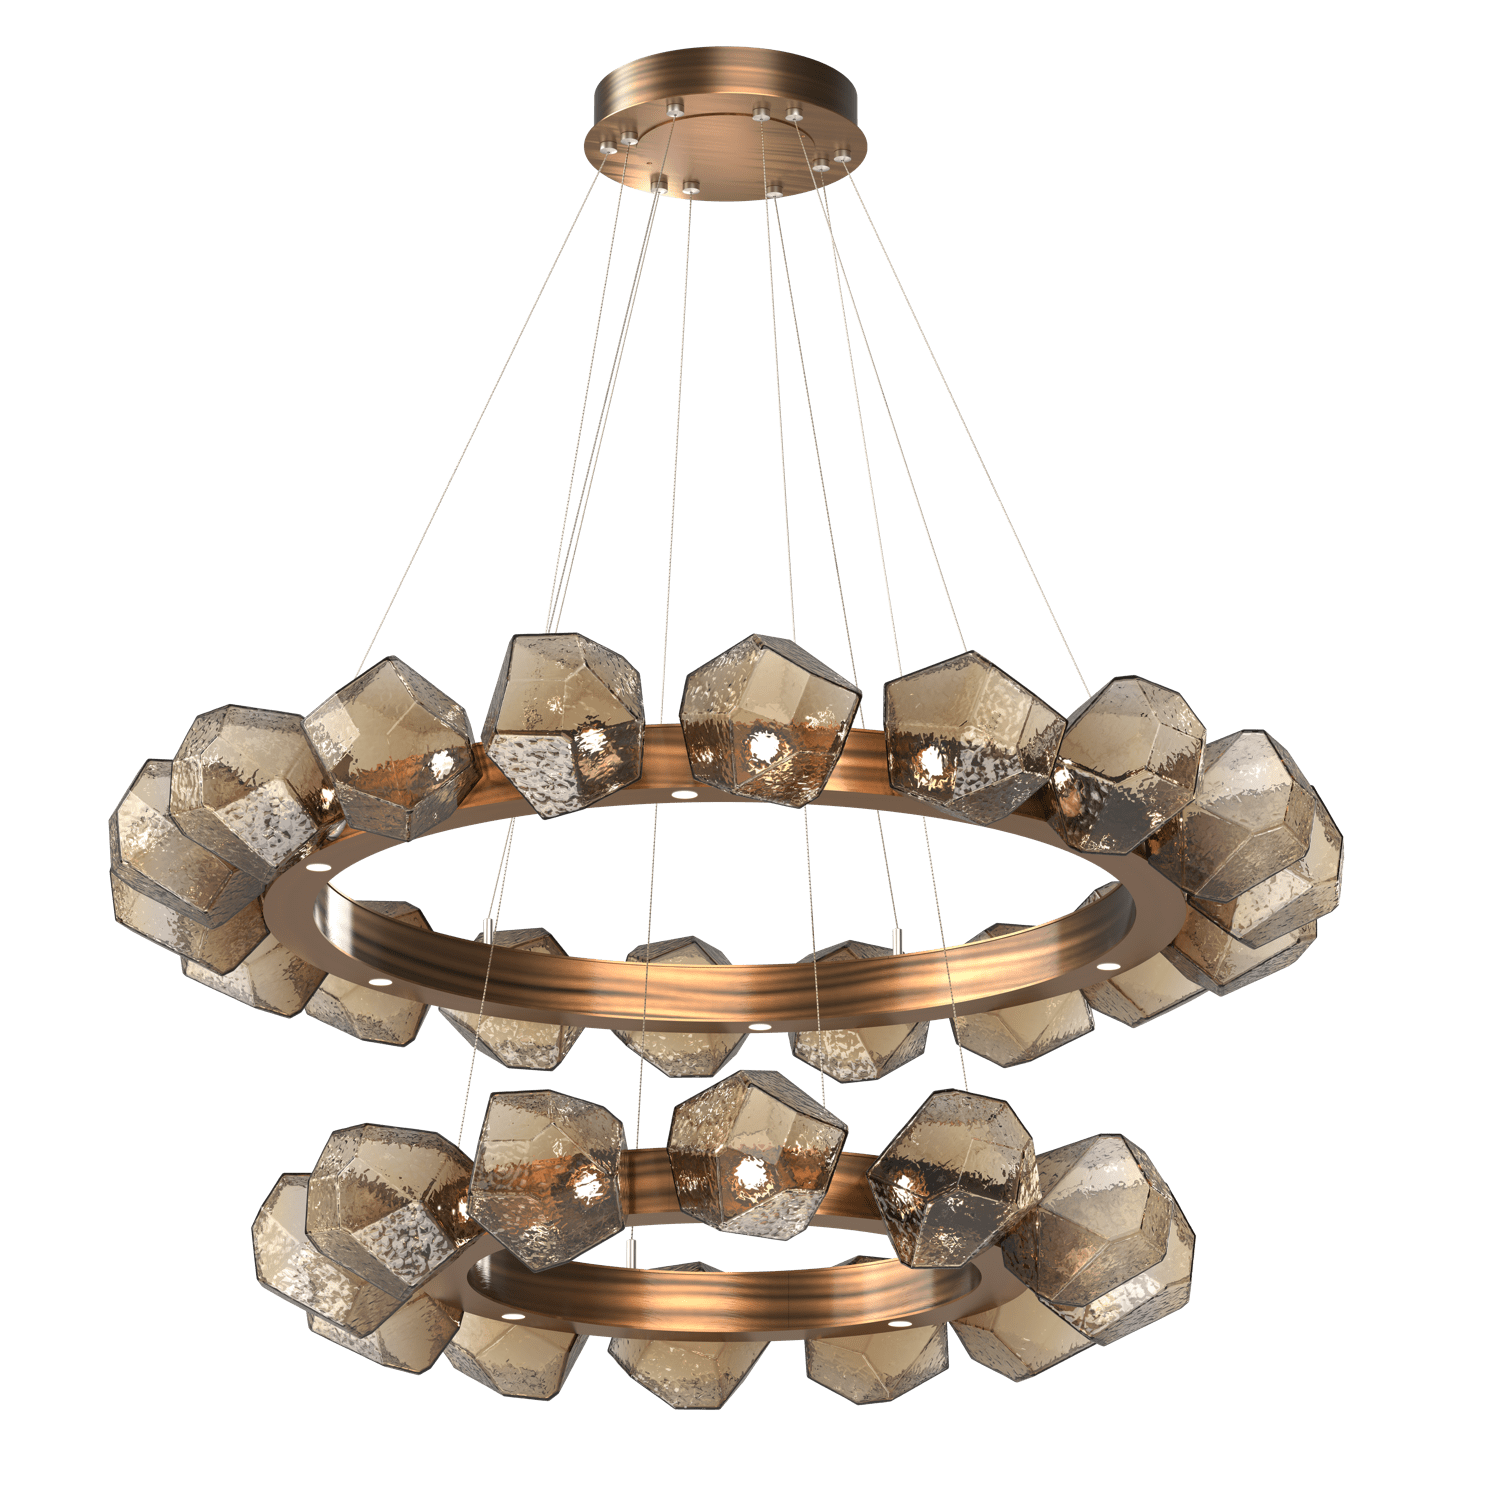 CHB0039-2T-RB-B-Hammerton-Studio-Gem-48-inch-two-tier-radial-ring-chandelier-with-oil-rubbed-bronze-finish-and-bronze-blown-glass-shades-and-LED-lamping